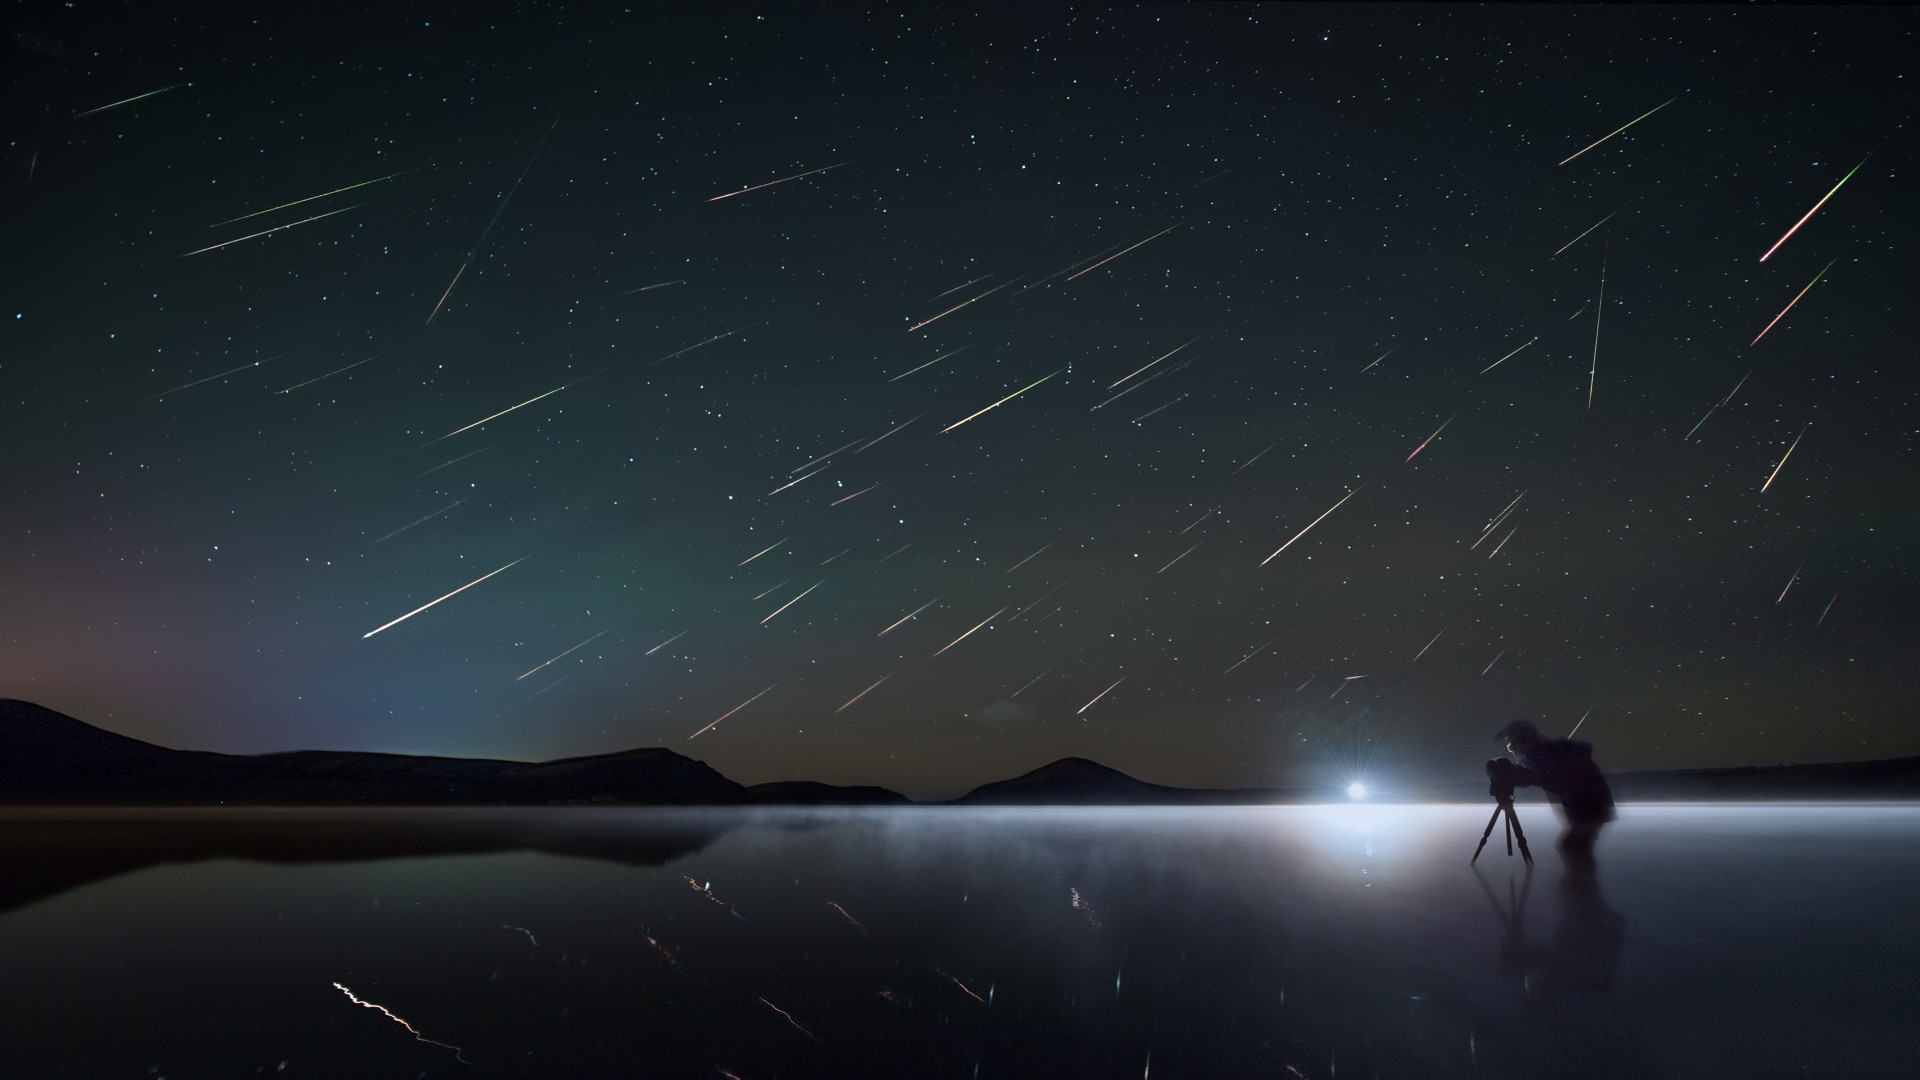 Things you didn't know about shooting stars or meteor showers